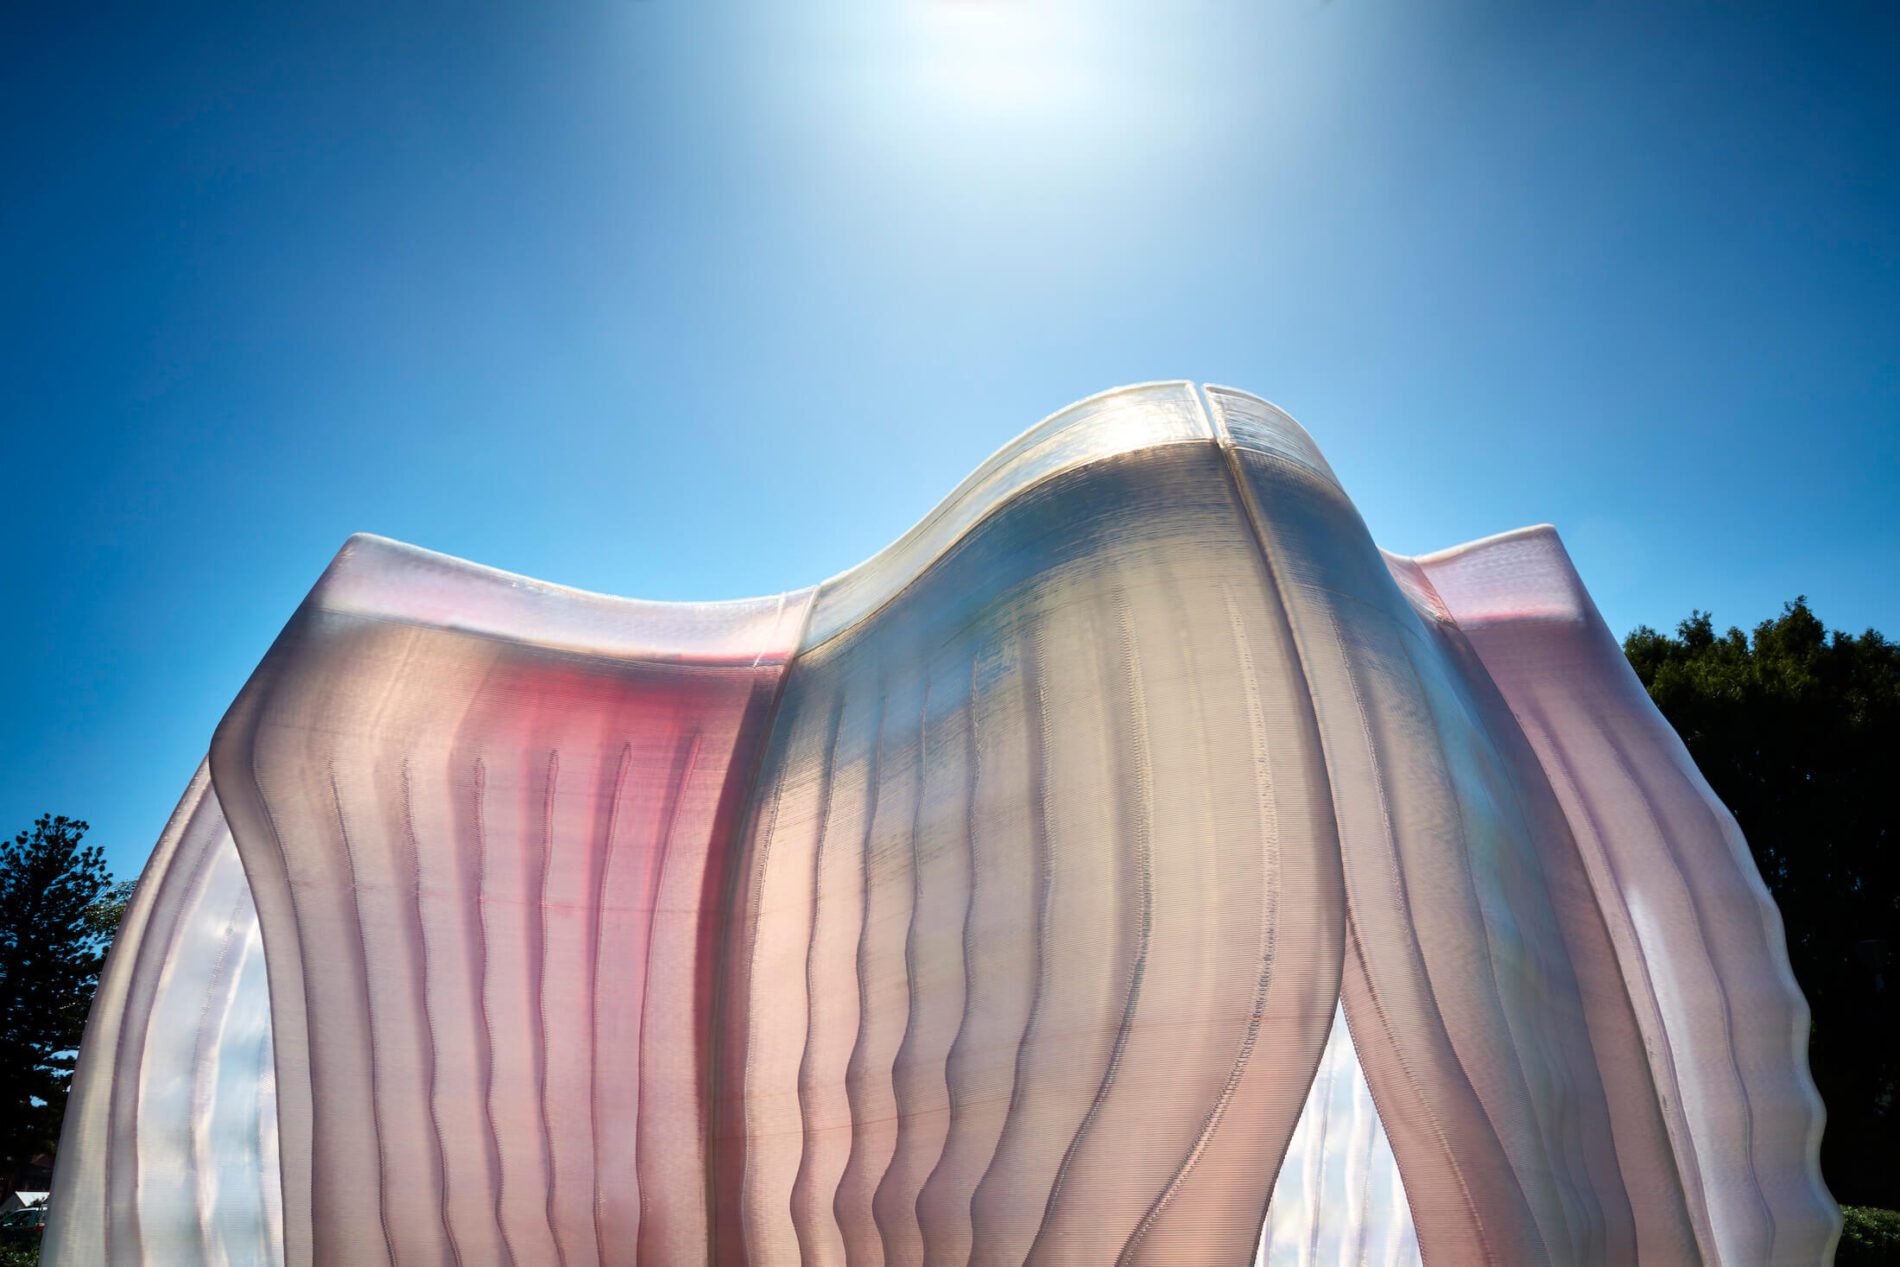 Organic pink formed structure with blue sky behind